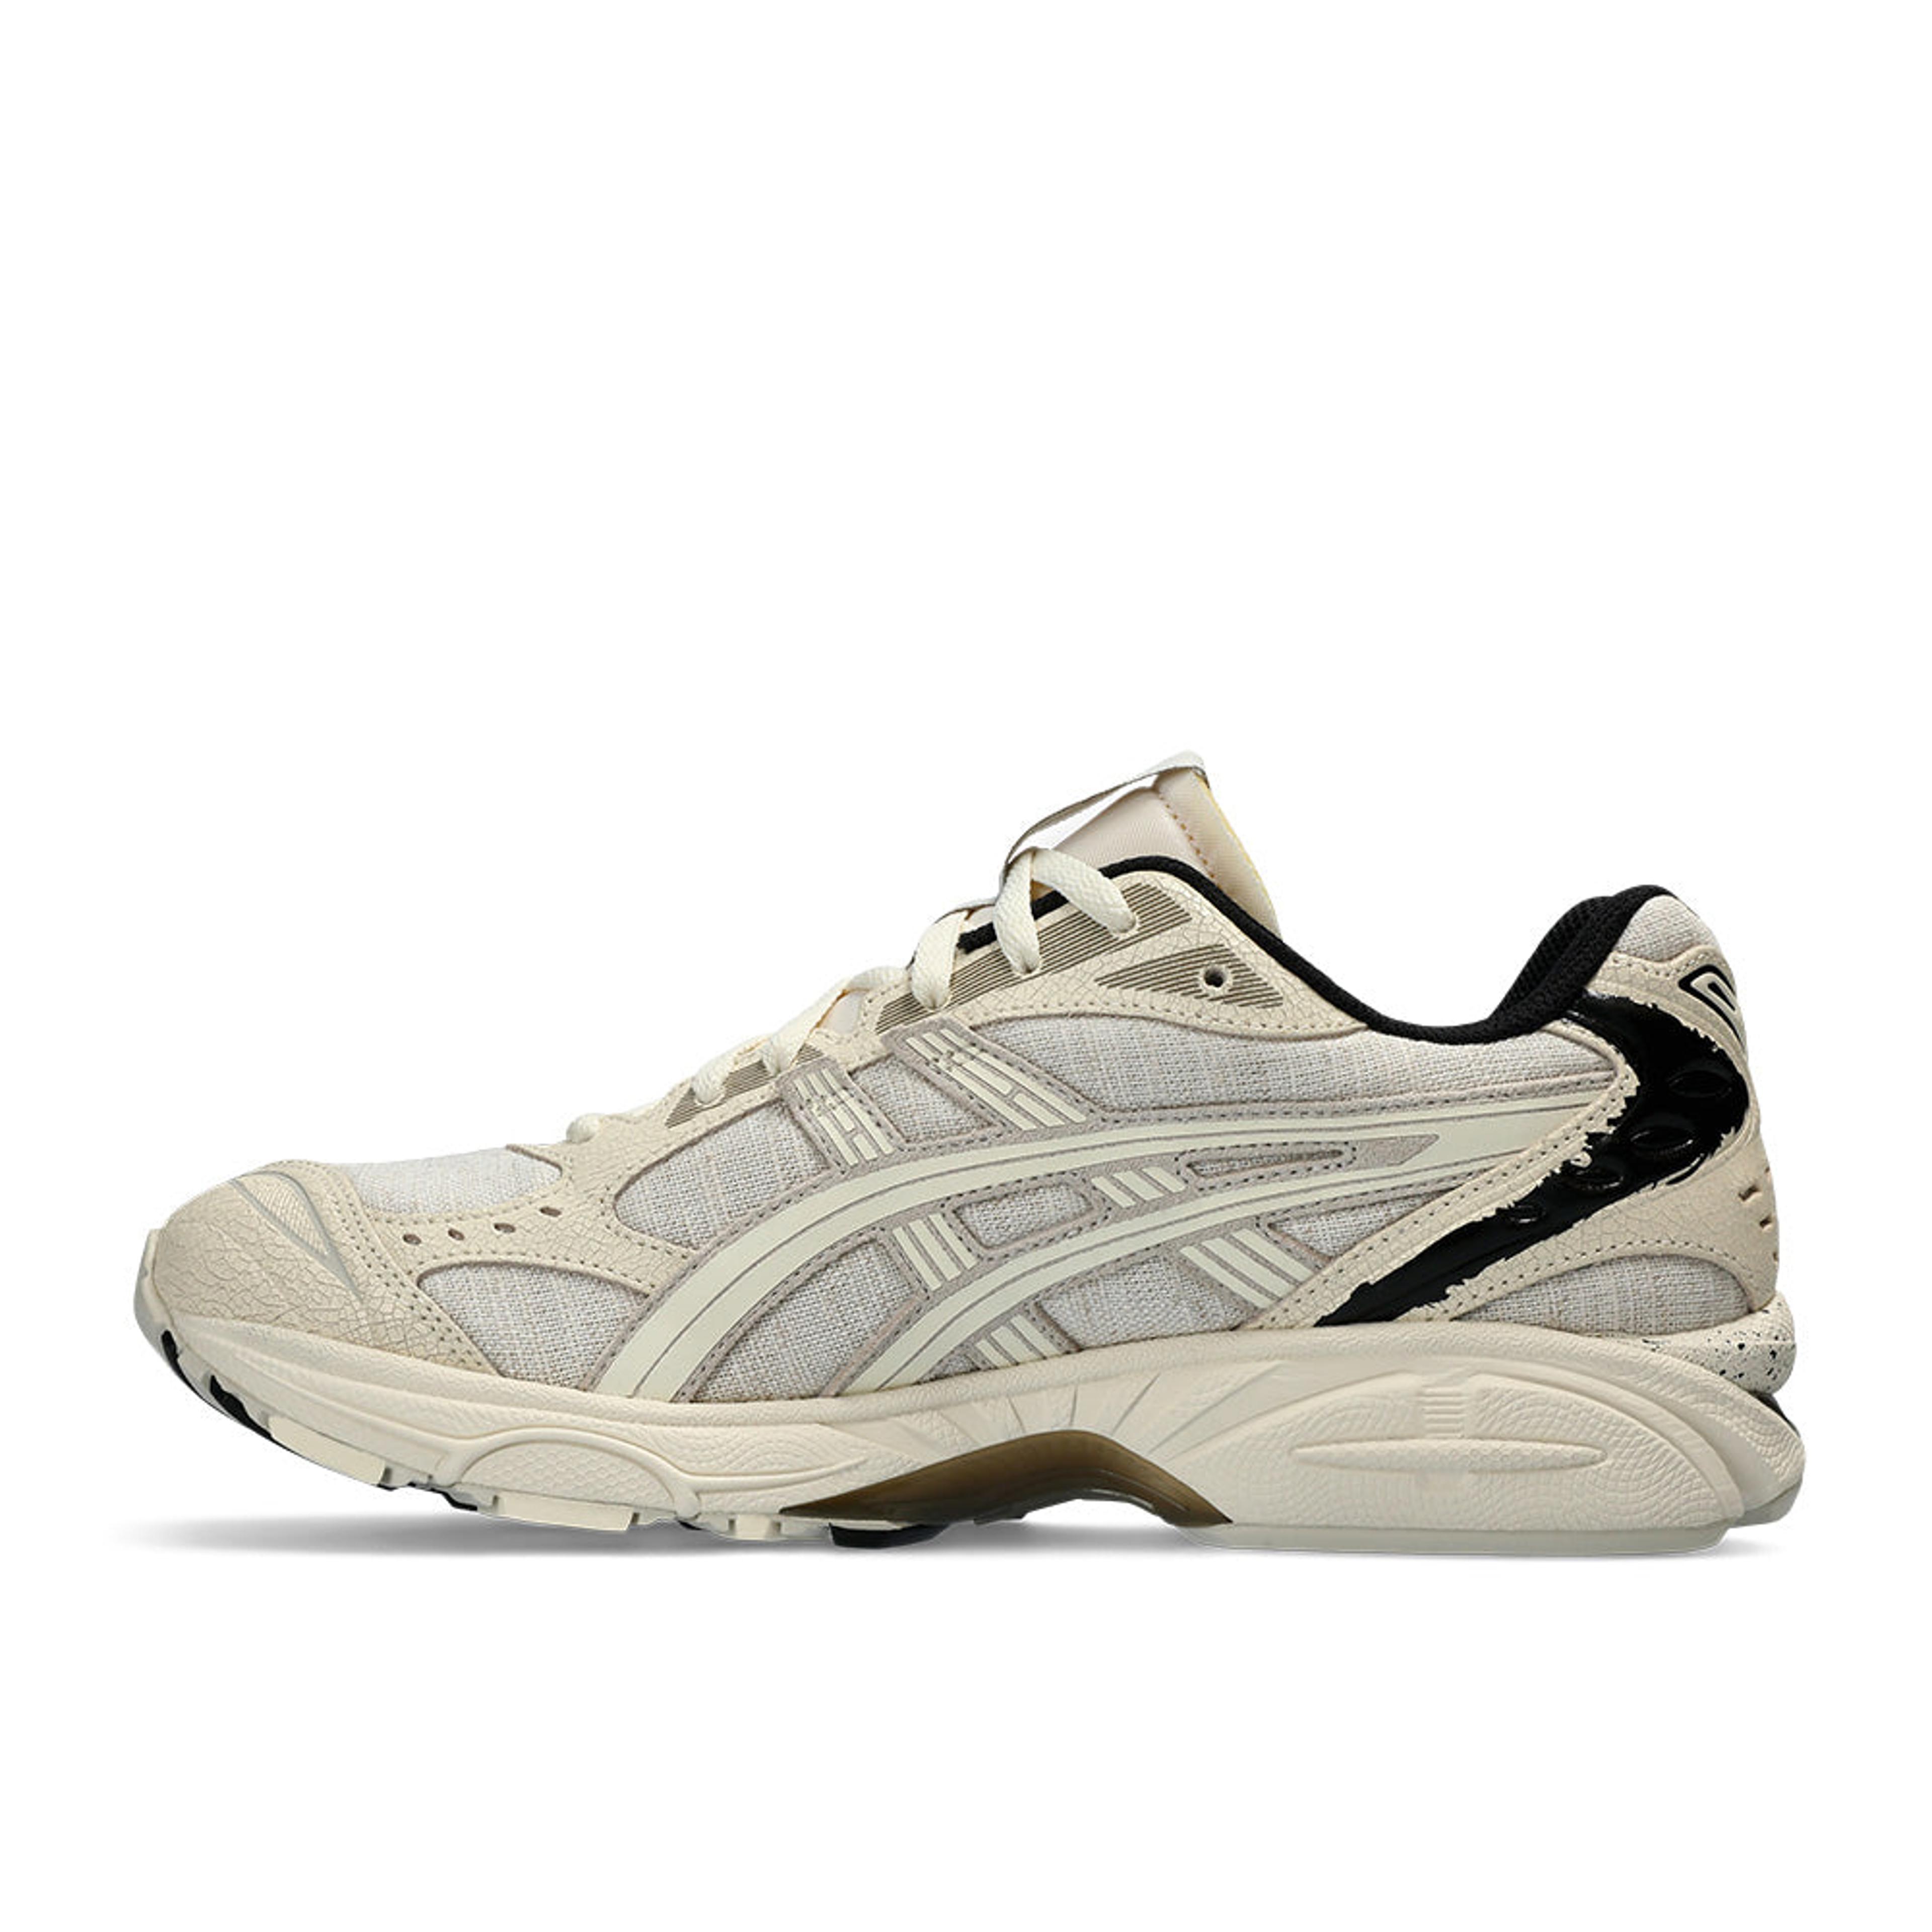 Alternate View 6 of Asics Gel-Kayano 14 "Imperfection" Pack